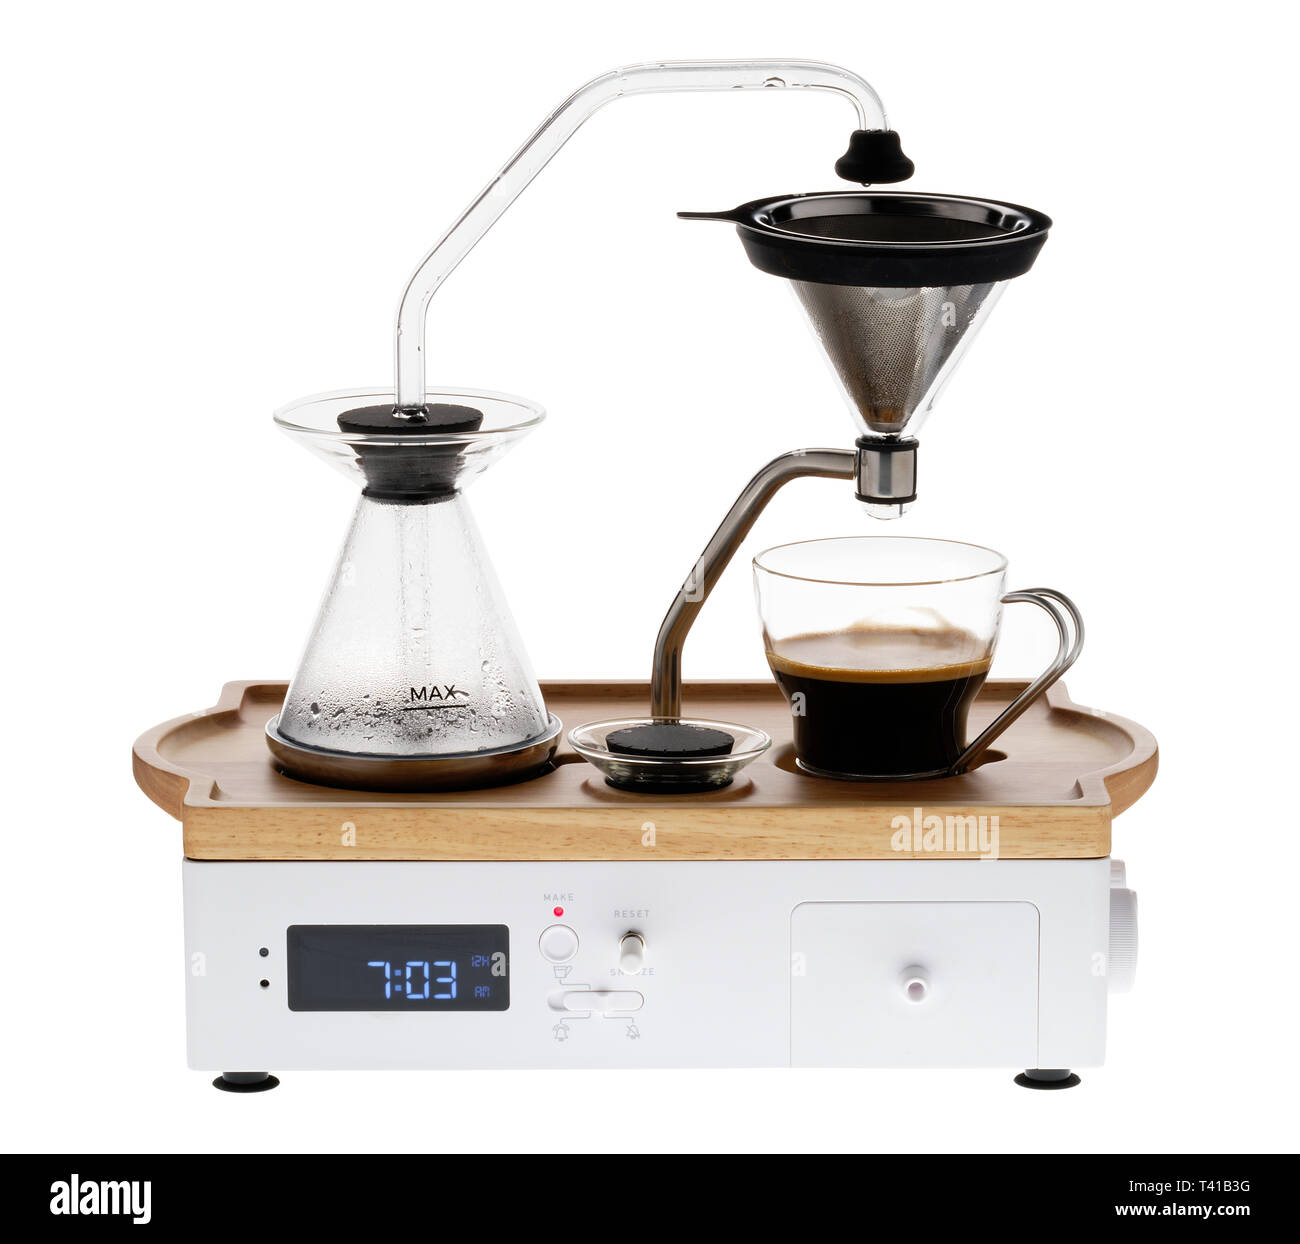 https://c8.alamy.com/comp/T41B3G/barisieur-coffee-alarm-clock-makes-fresh-coffee-at-a-preset-time-and-provides-milk-in-mini-cooler-bedside-or-kitchen-appliance-T41B3G.jpg